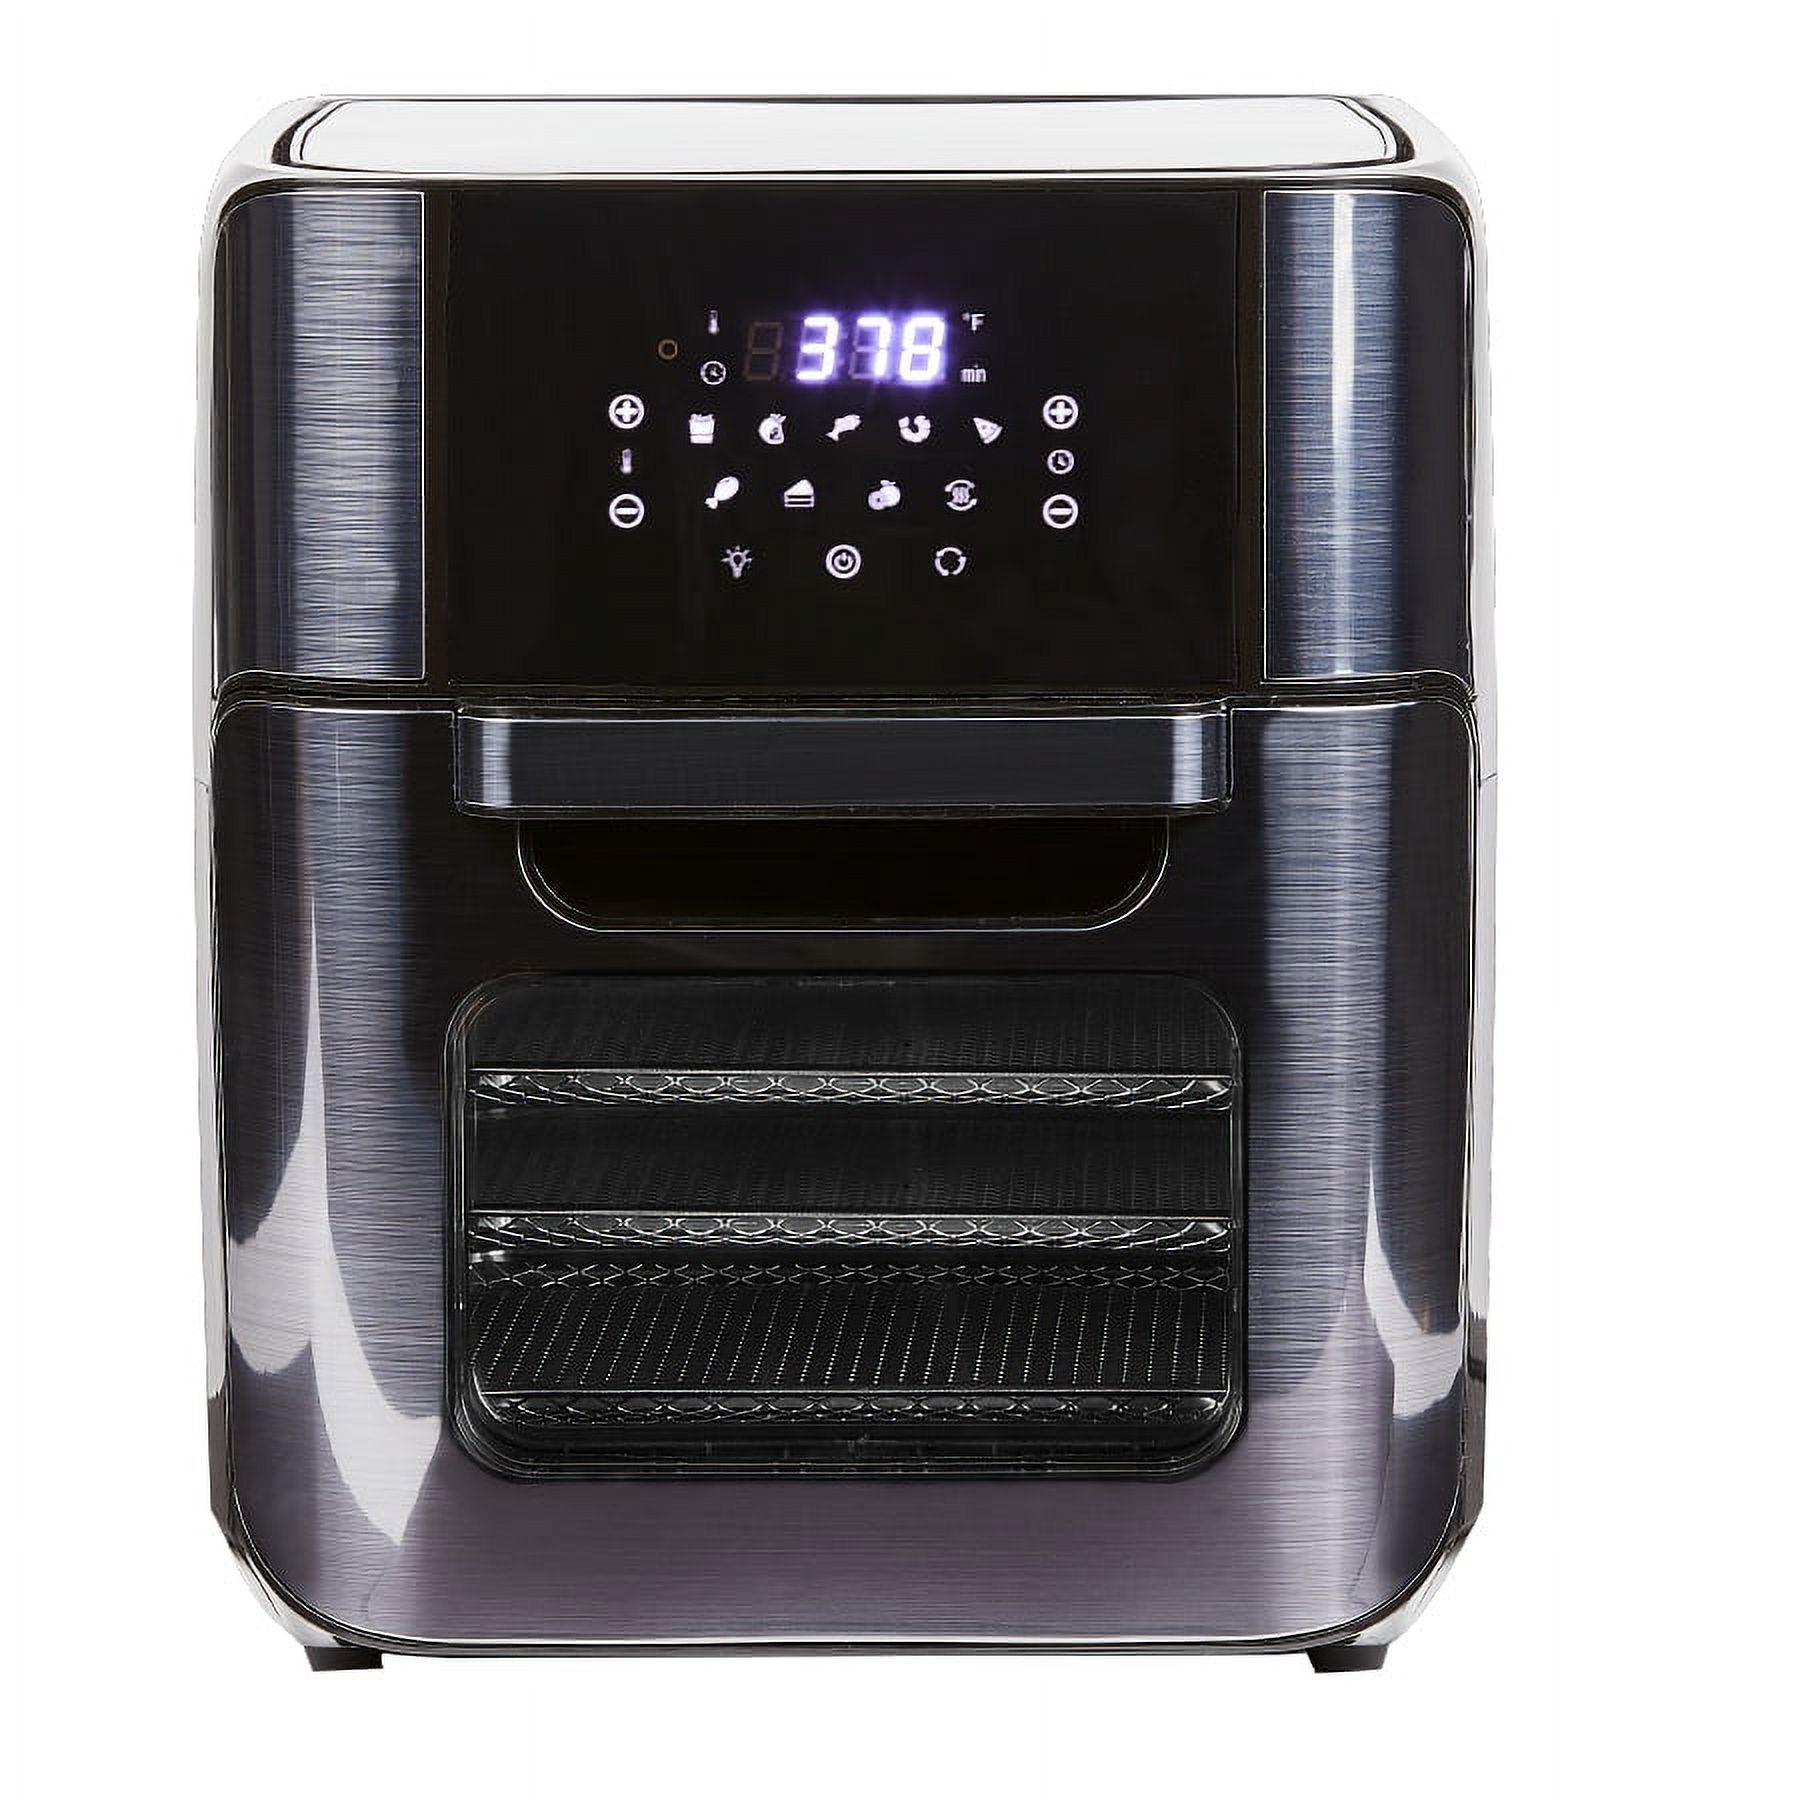 PowerXL Air Fryer Home Pro, 12 Quart, Black Stainless Steel, 1700 Watts - image 1 of 8